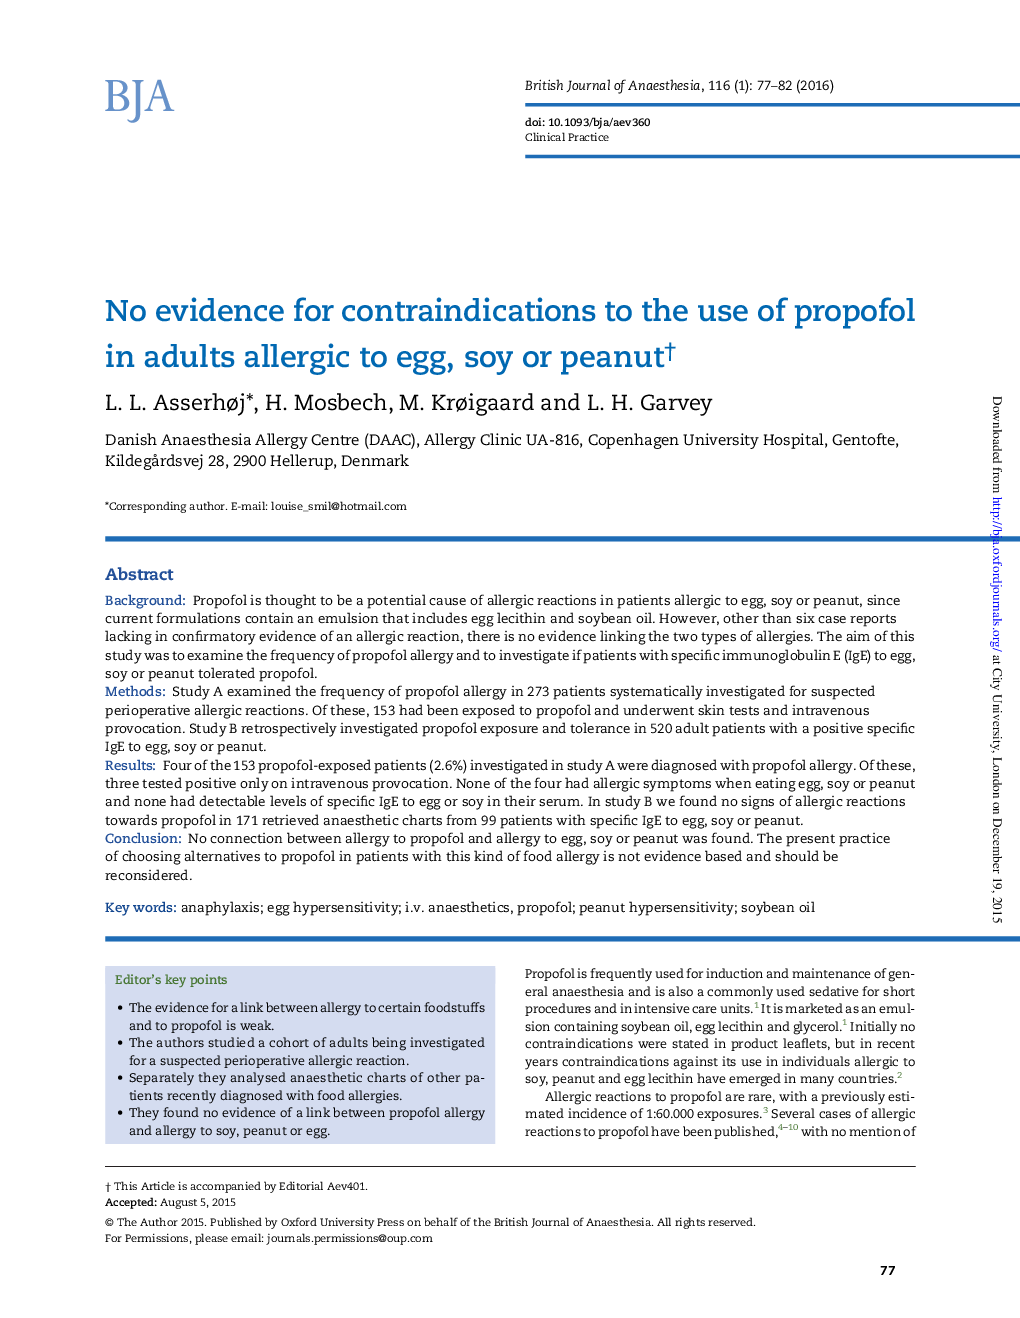 No evidence for contraindications to the use of propofol in adults allergic to egg, soy or peanutâ 